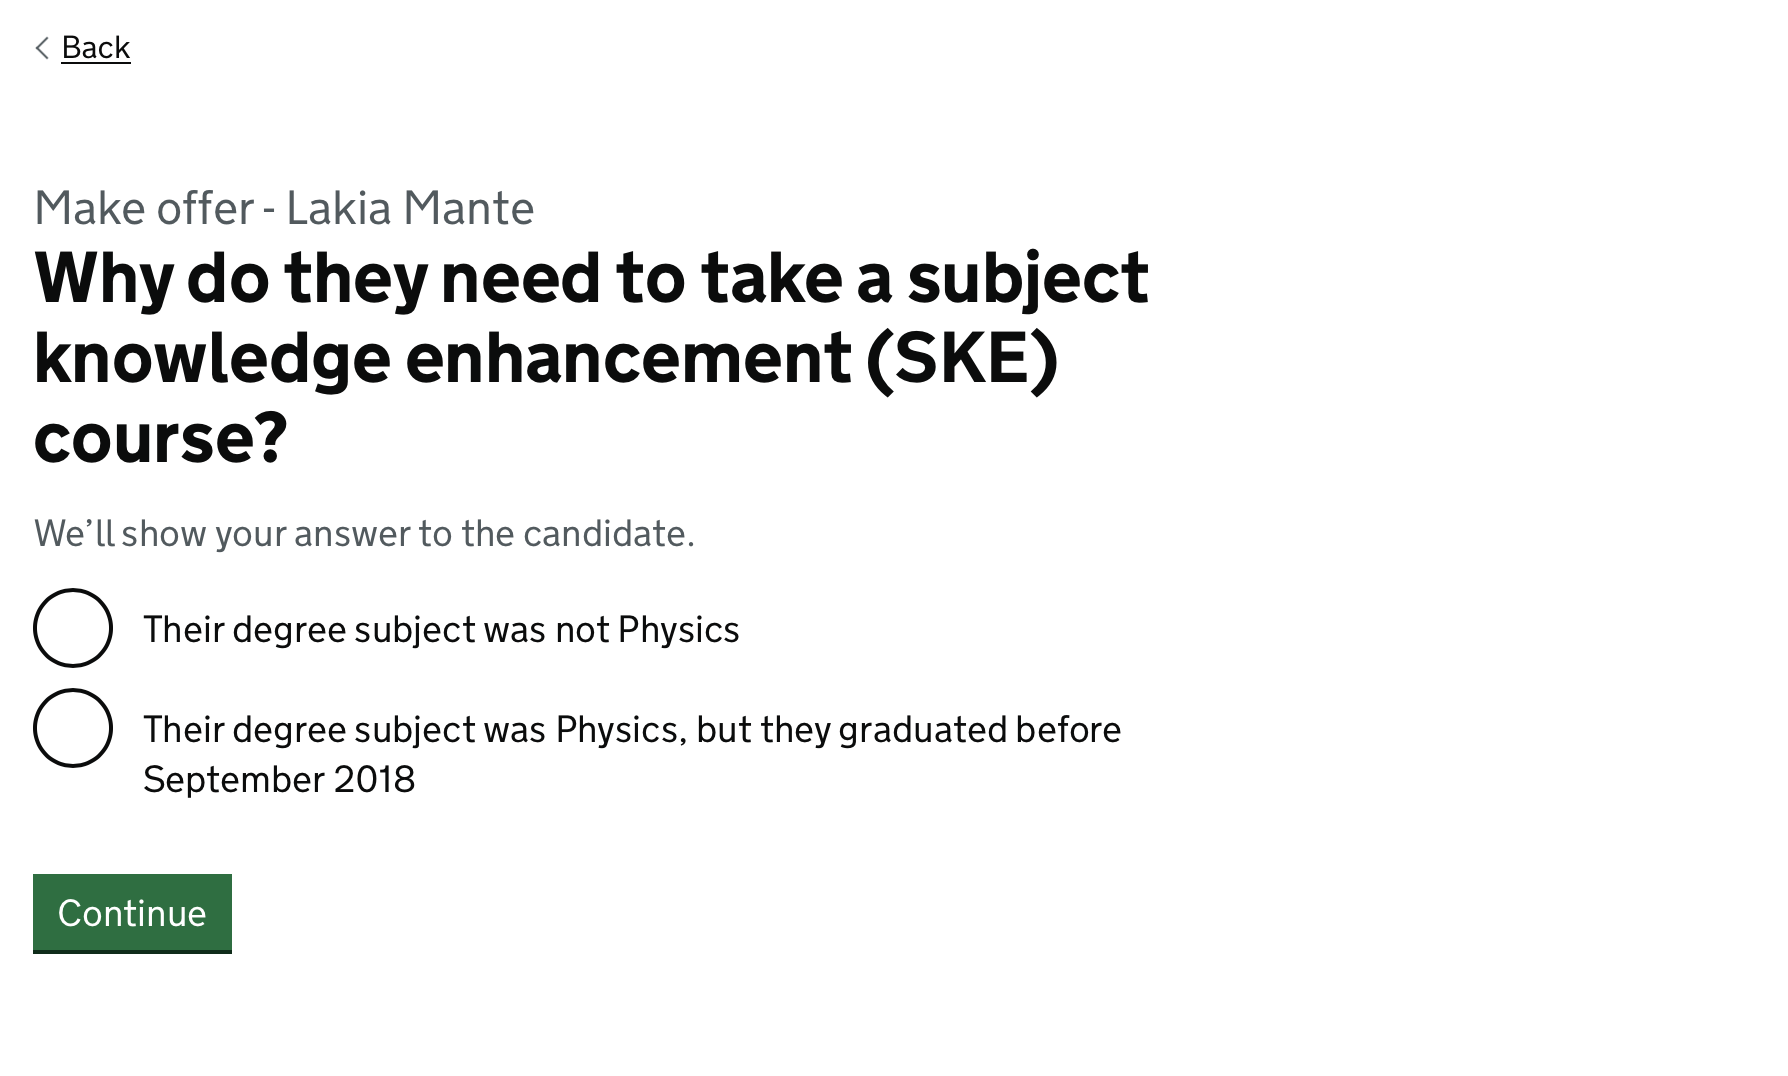 Screenshot with the heading ‘Why do they need to take a subject knowledge enhancement (SKE) course?’ with radio button answers for ‘They degree was not Physics’ and ‘Their degree subject was Physics but they graduated before September 2018’.